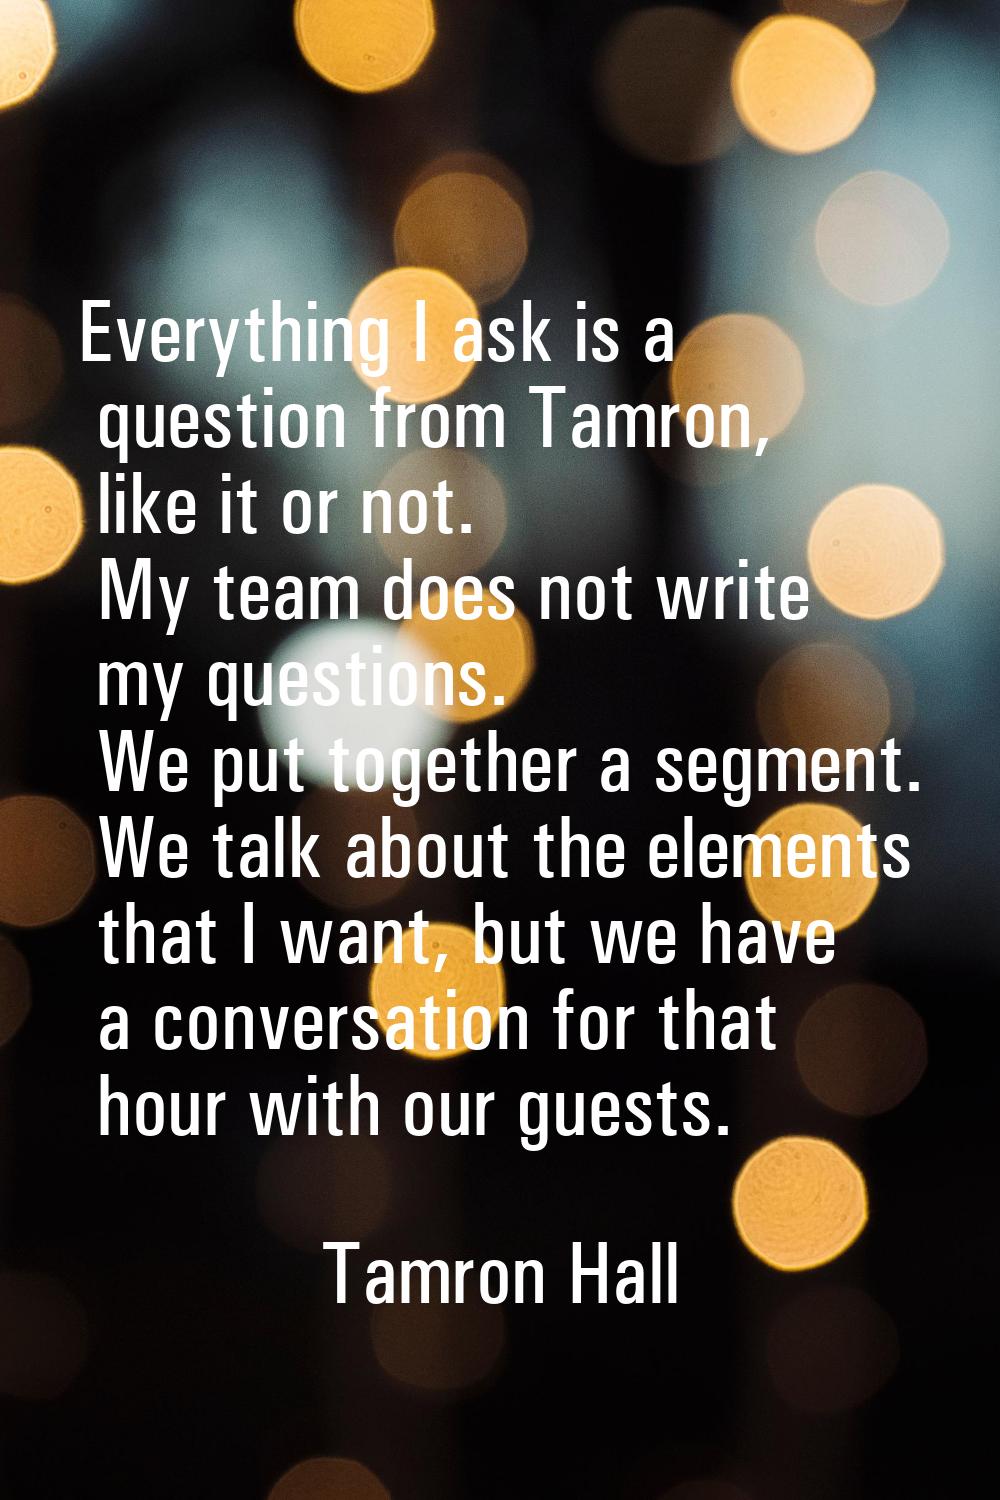 Everything I ask is a question from Tamron, like it or not. My team does not write my questions. We